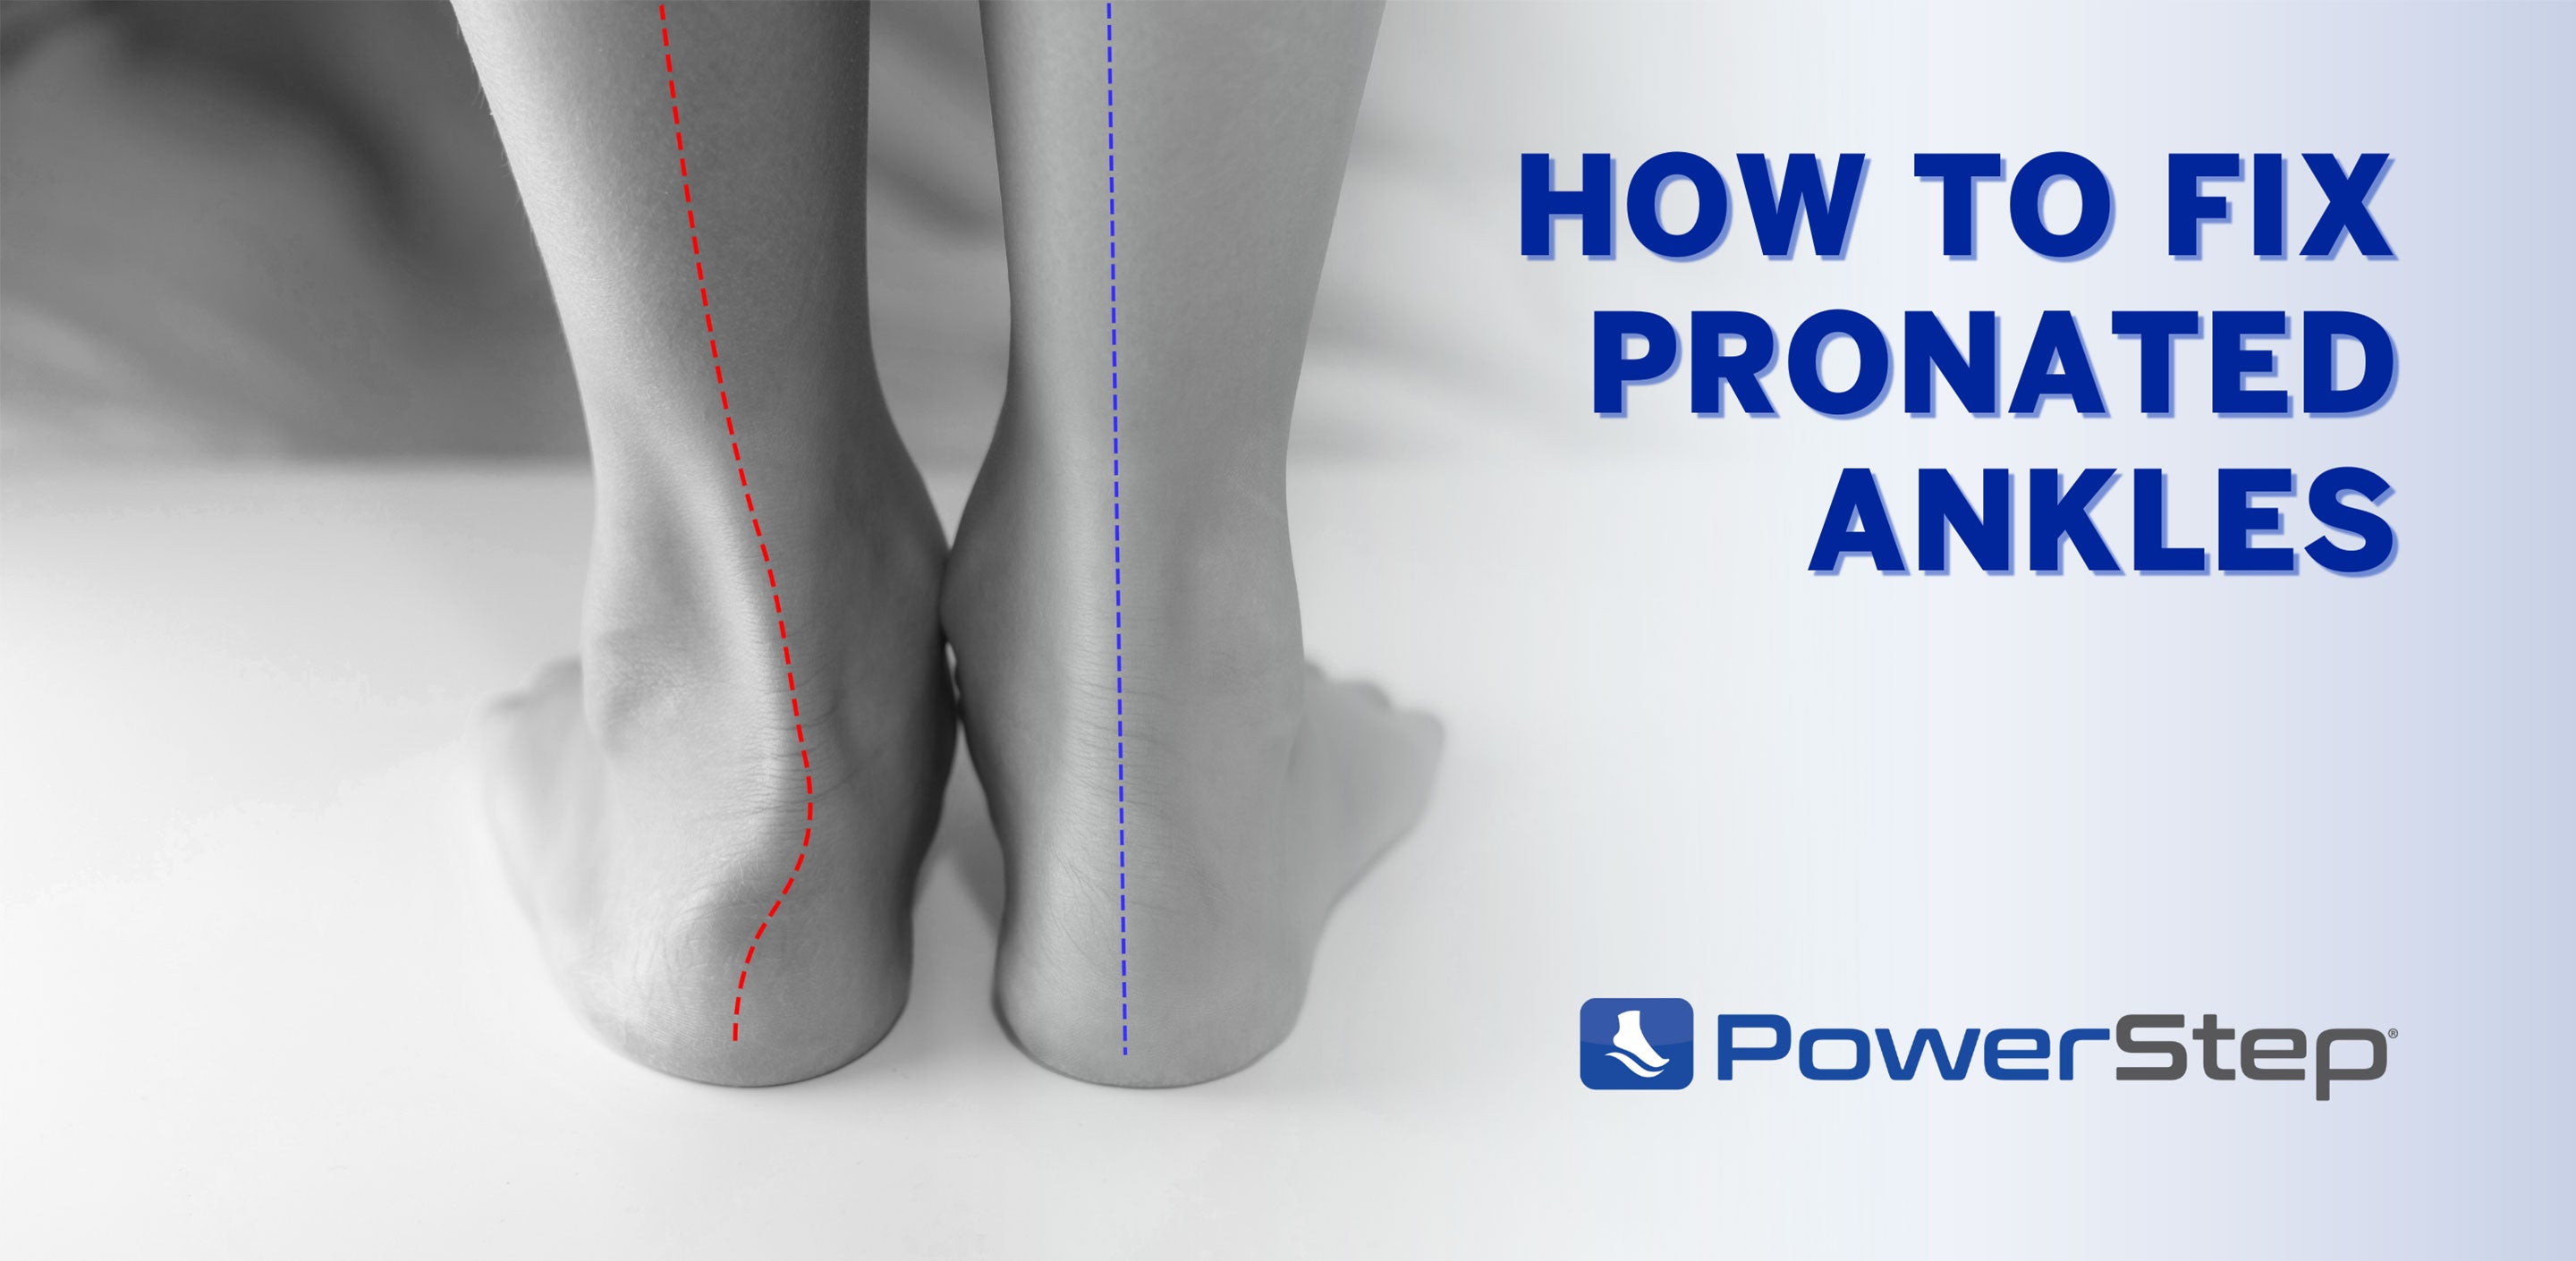 How to Fix Pronated Ankles: Insoles & Treatment Options by PowerStep